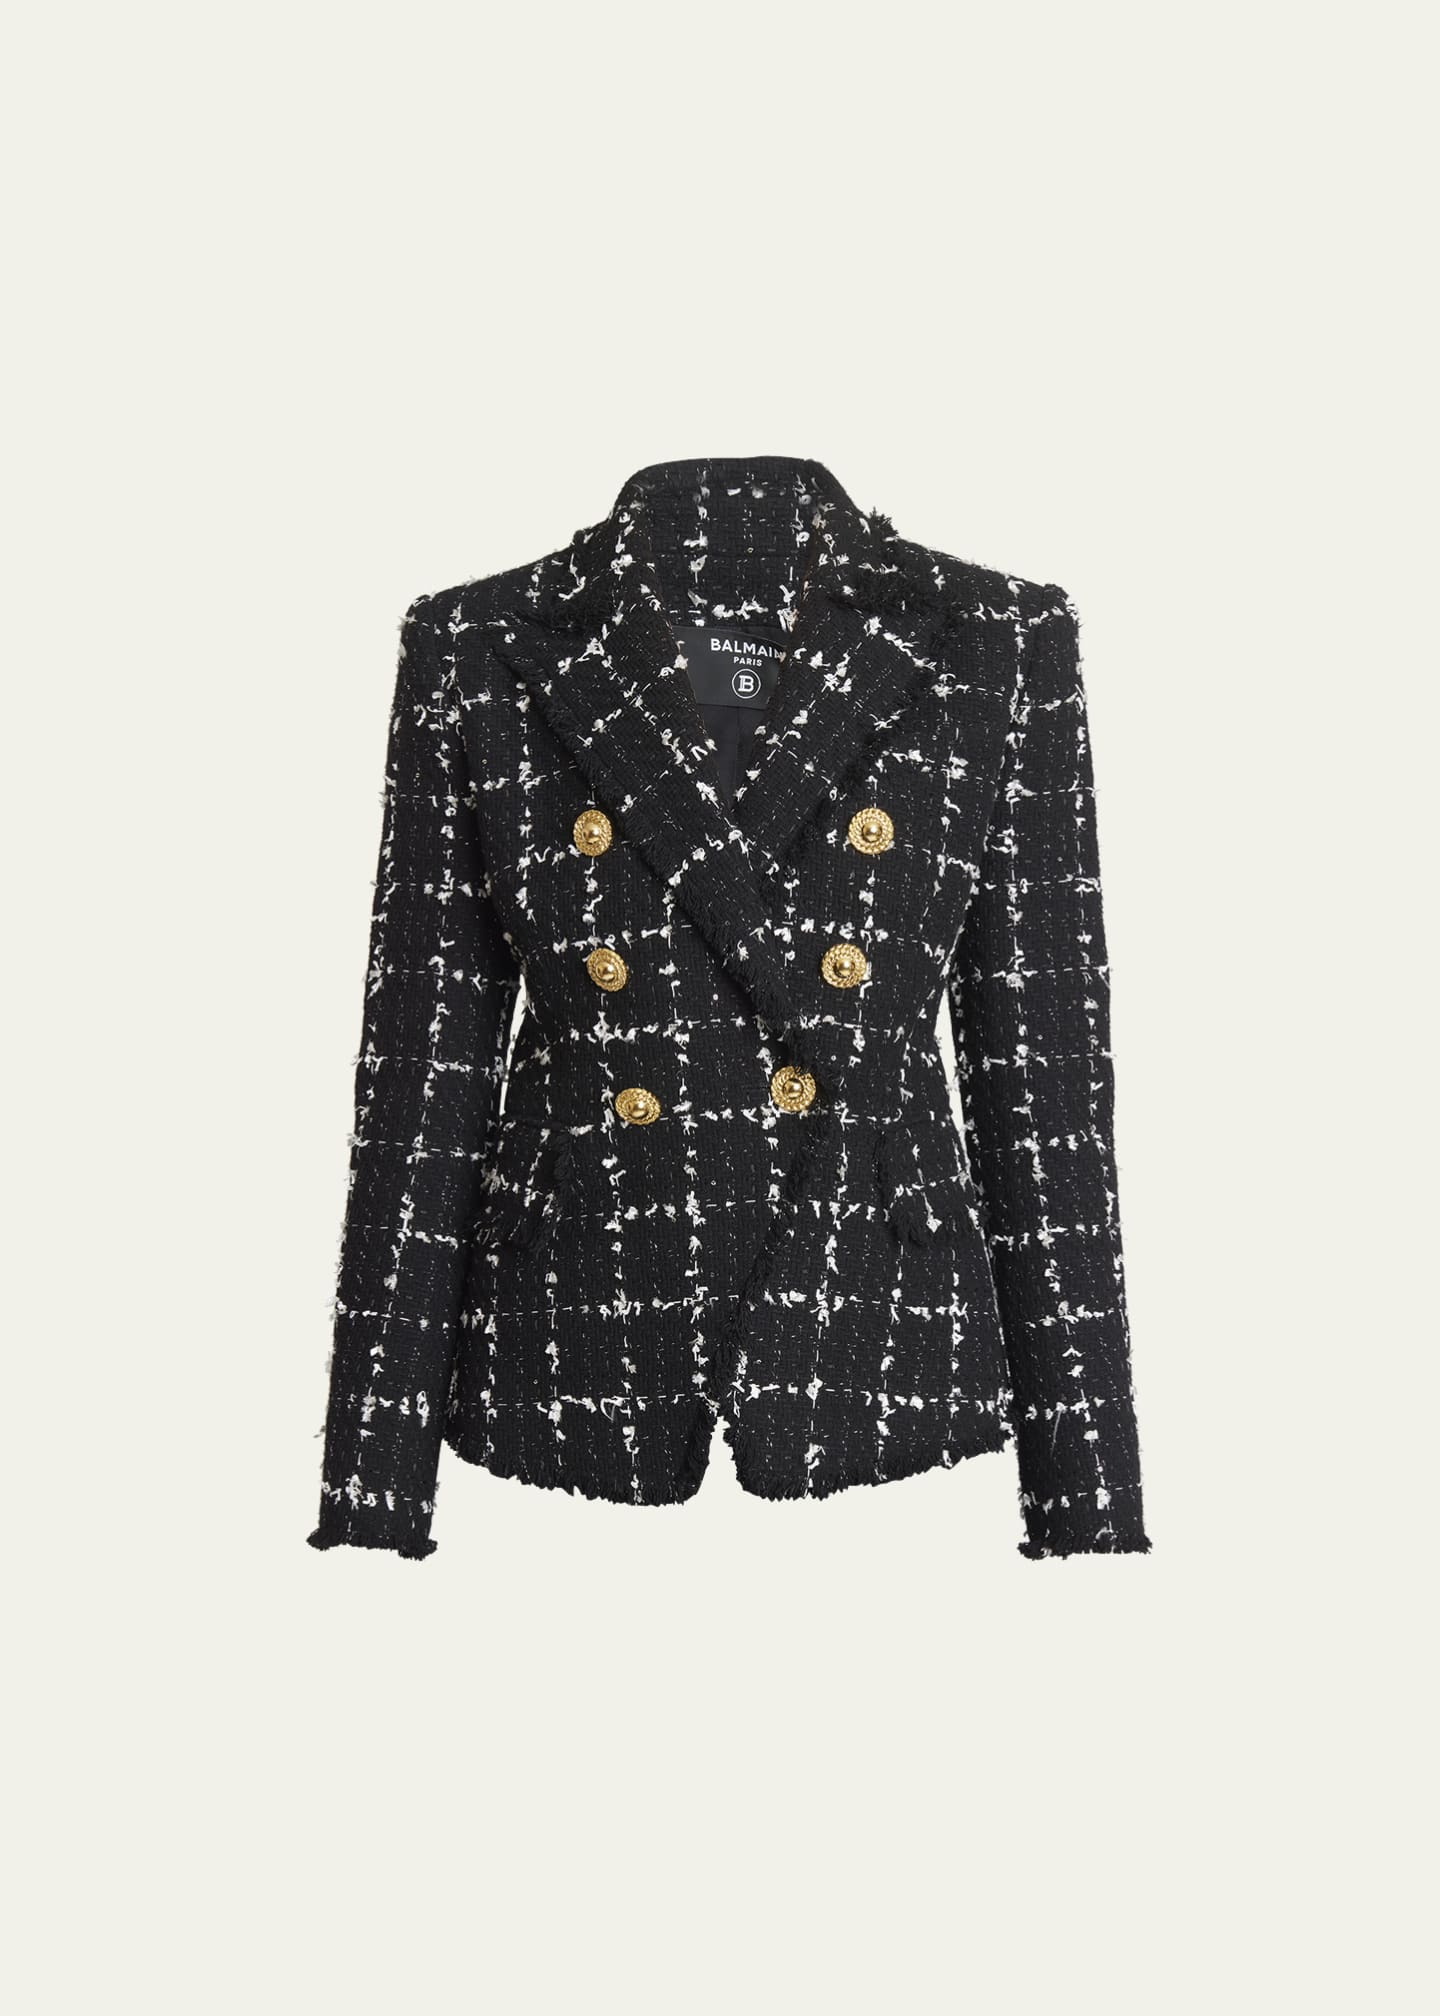 Black and White Double Breasted Tweed Blazer